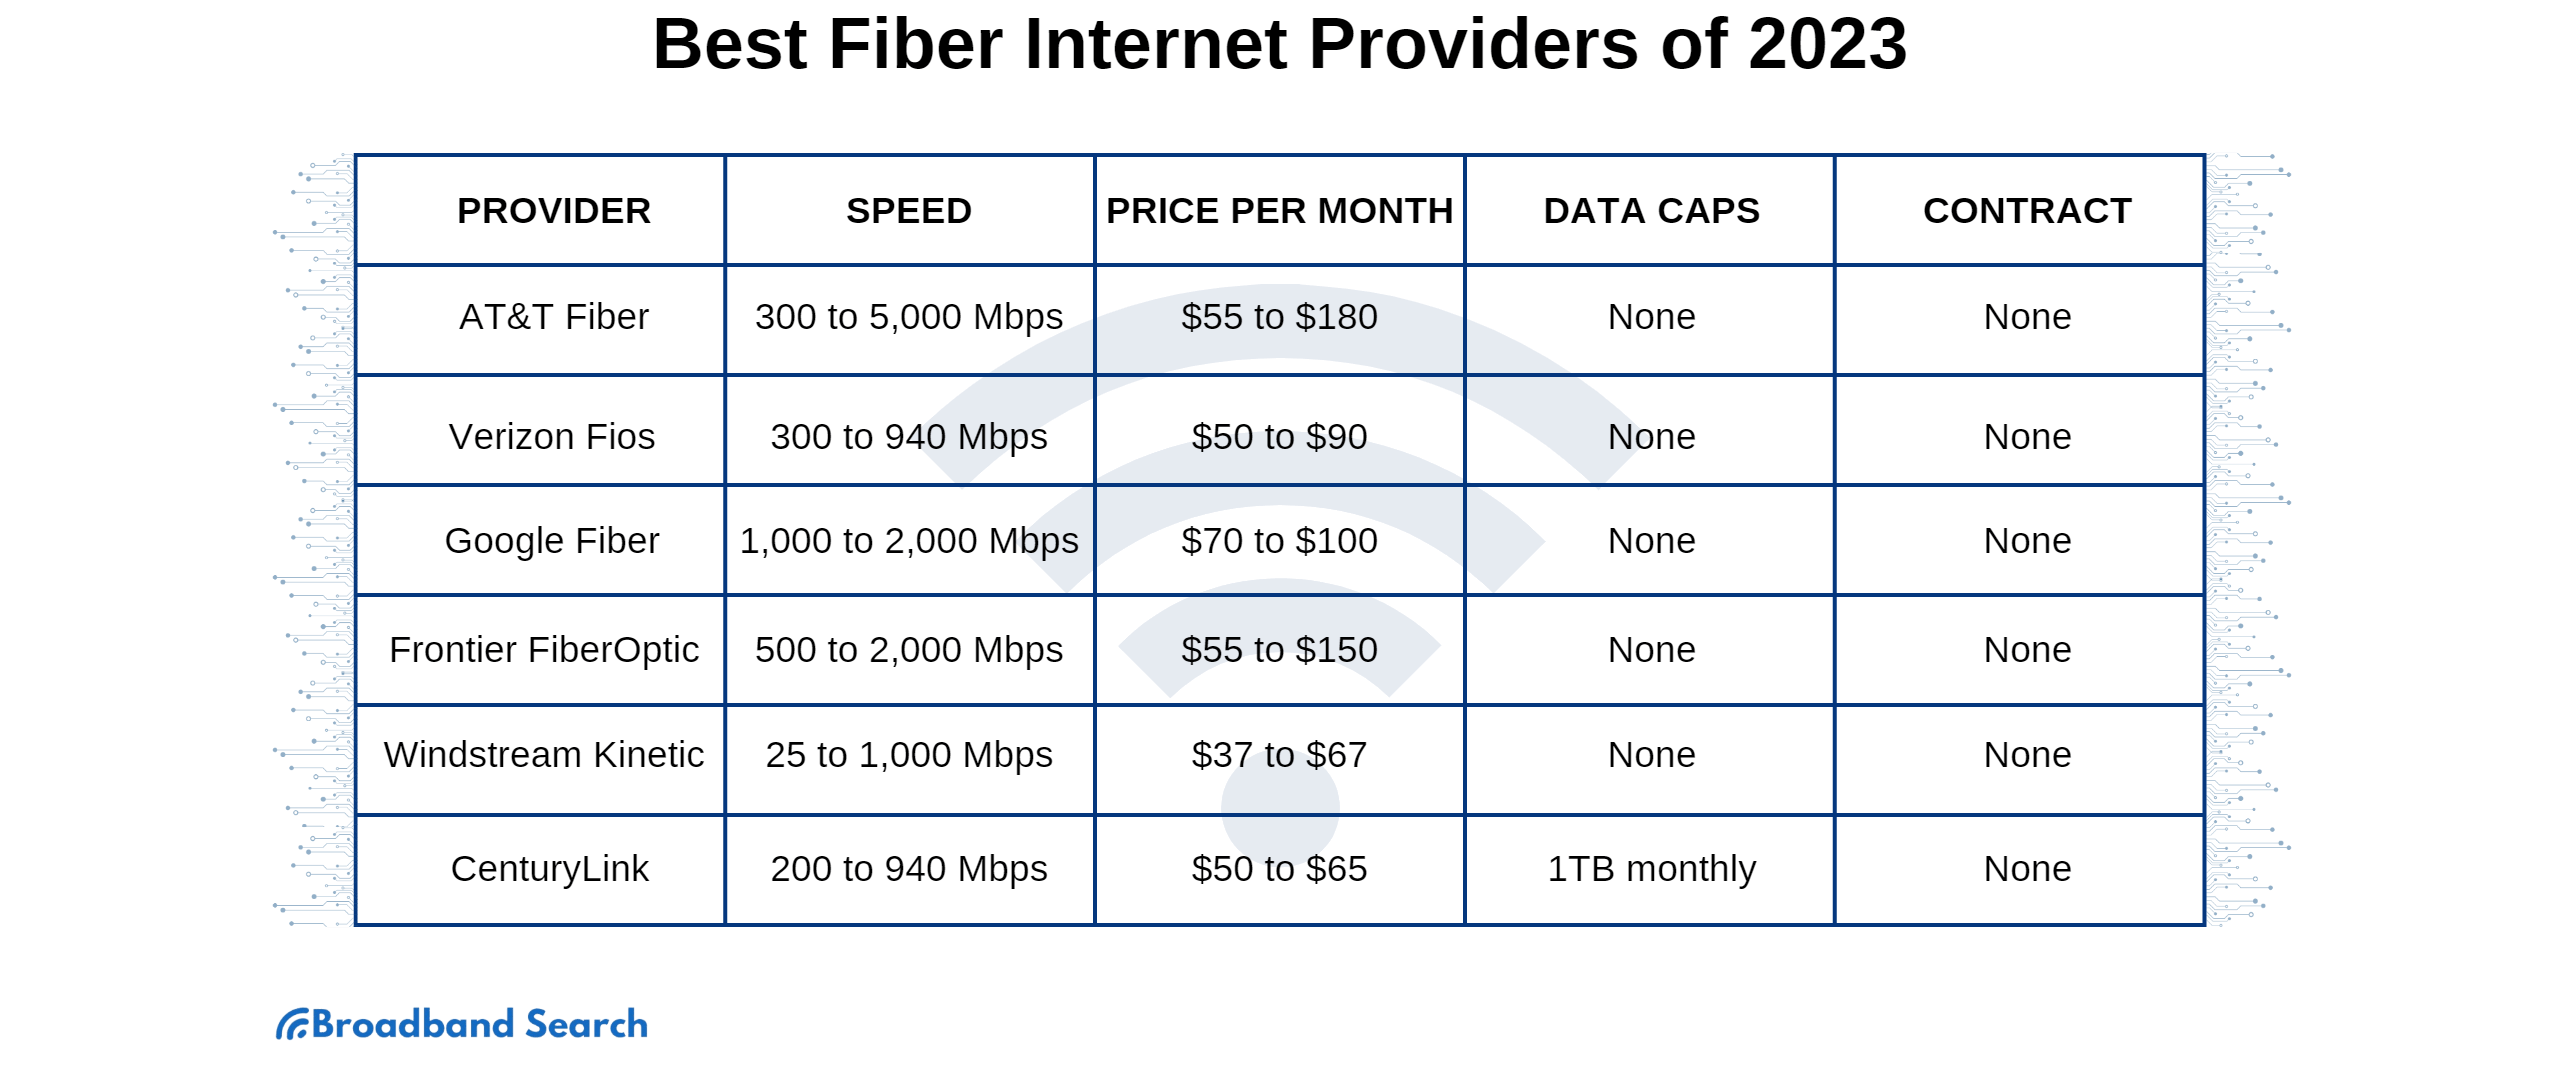 Does Working Remotely Require a Fiber Connection?